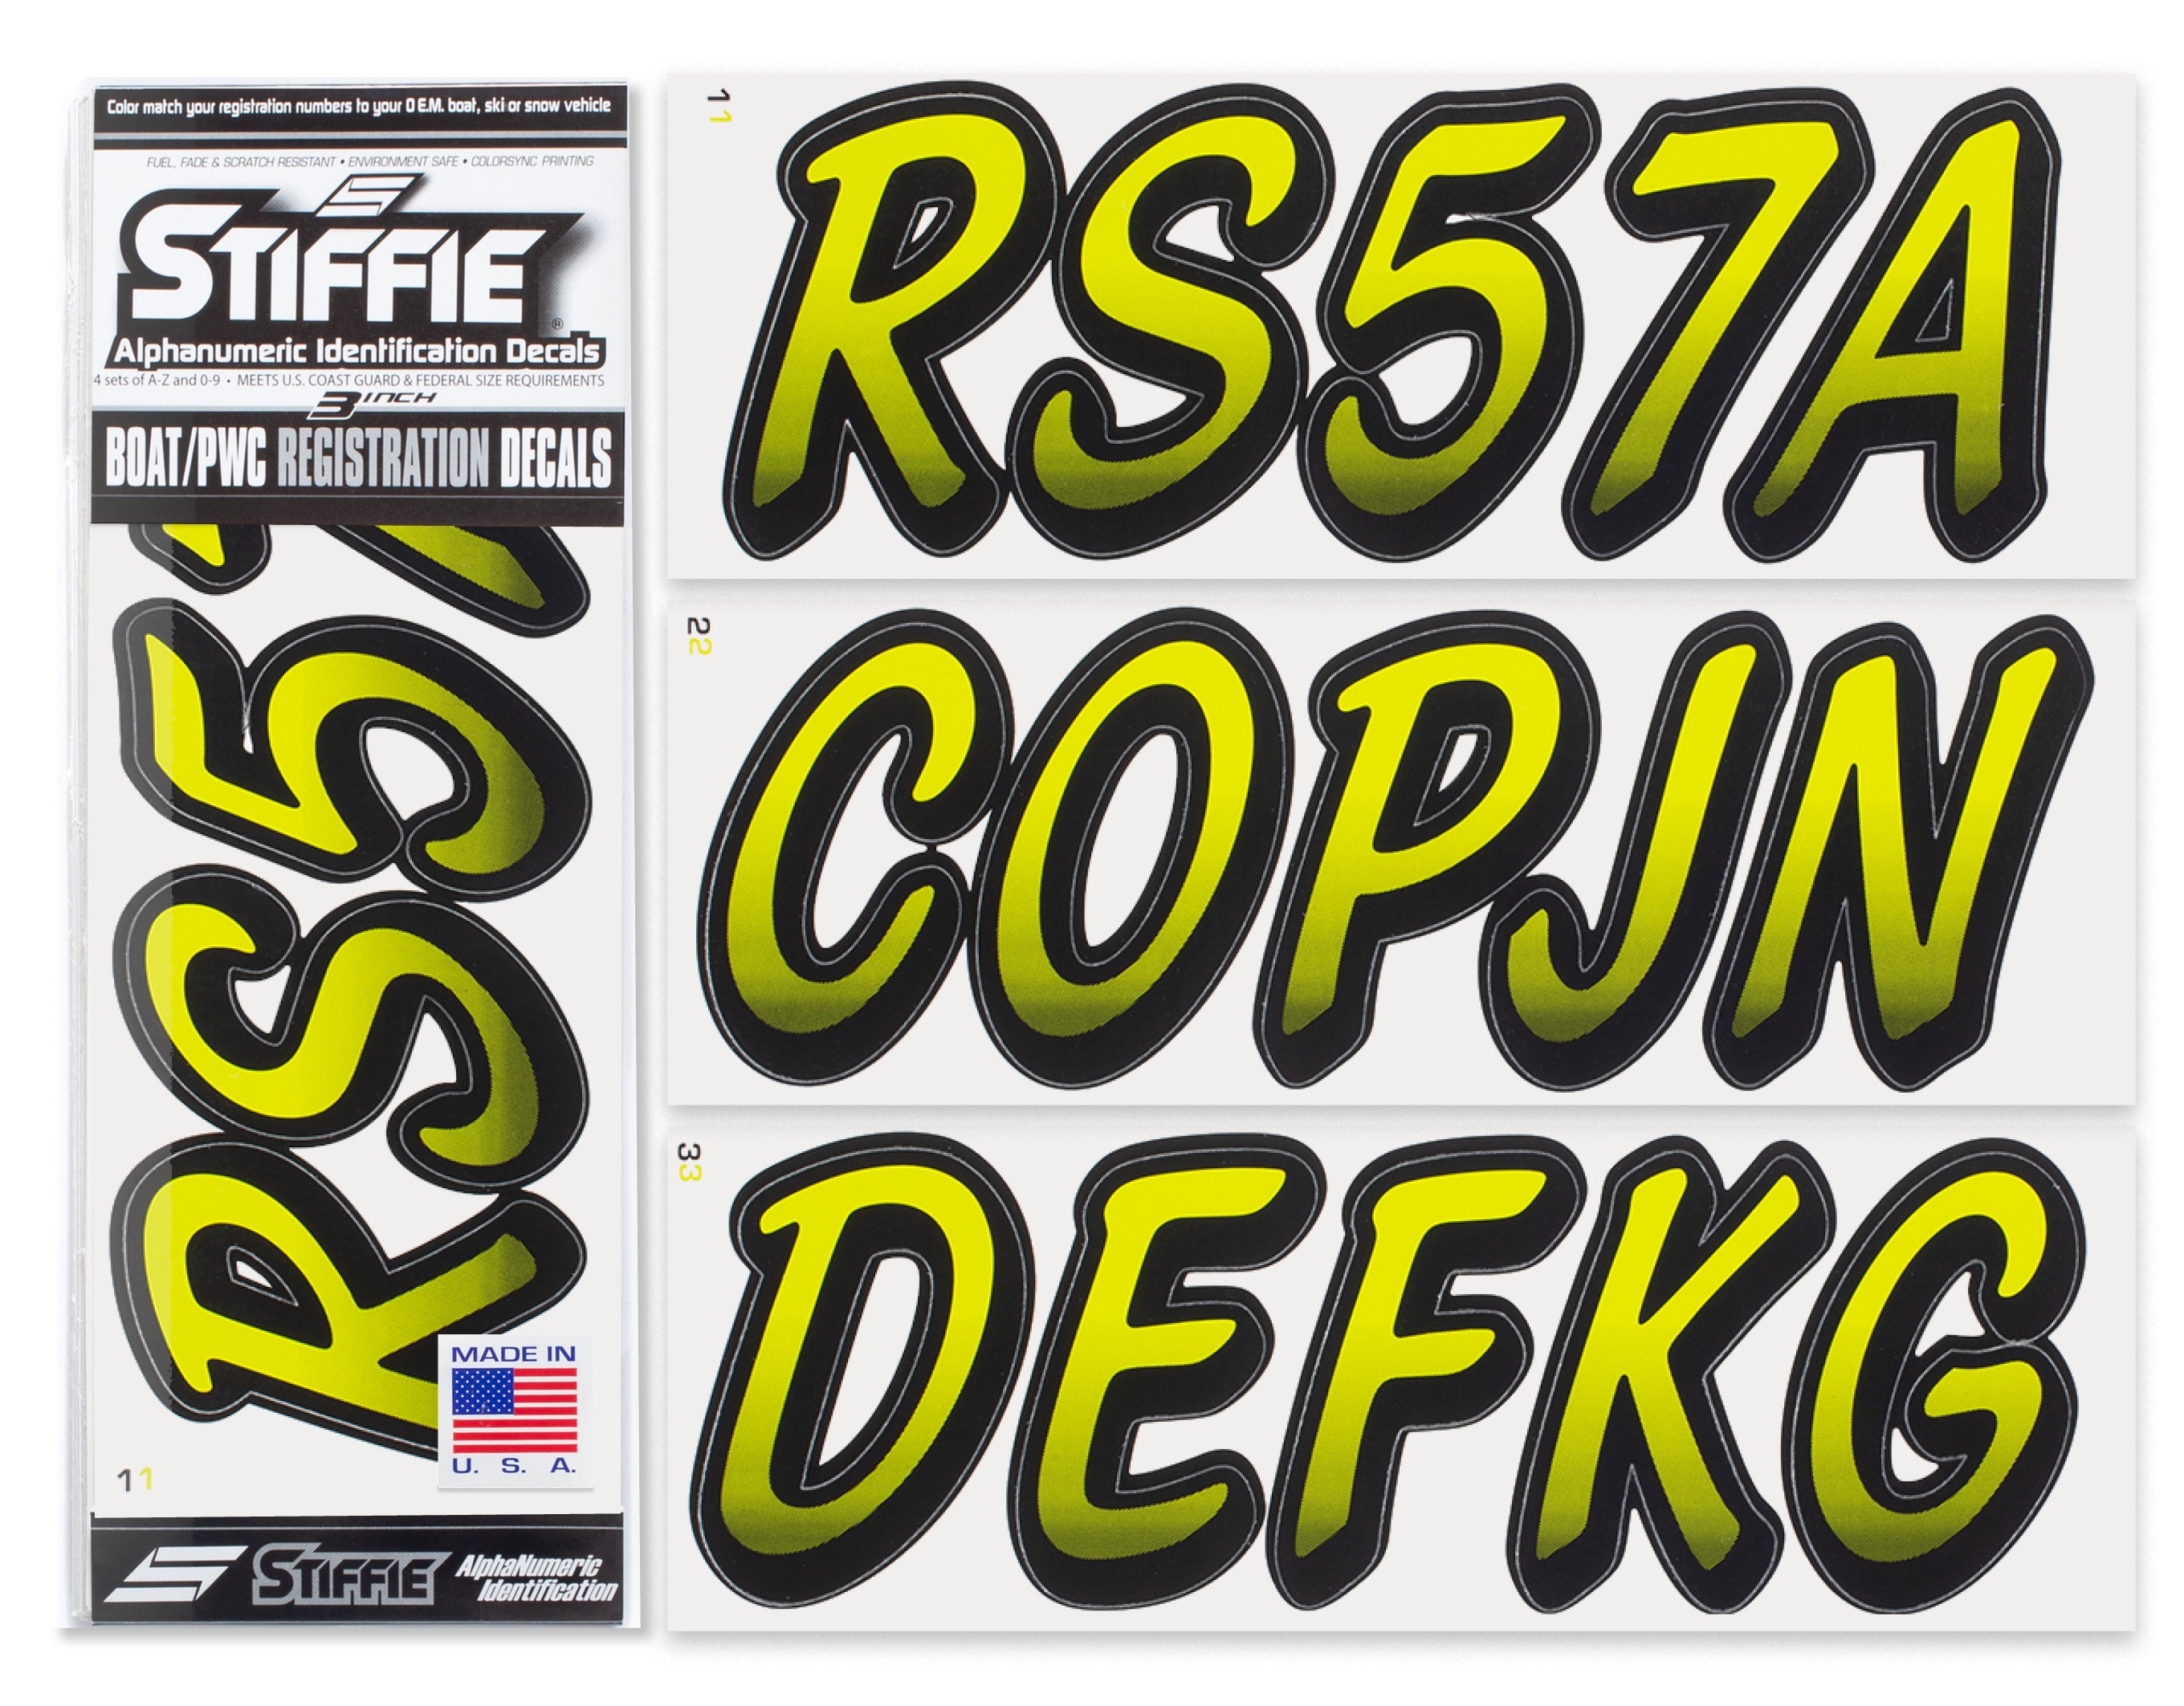 Stiffie Whipline Electric Yellow/Black 3" Alpha-Numeric Registration Identification Numbers Stickers Decals for Boats & Personal Watercraft